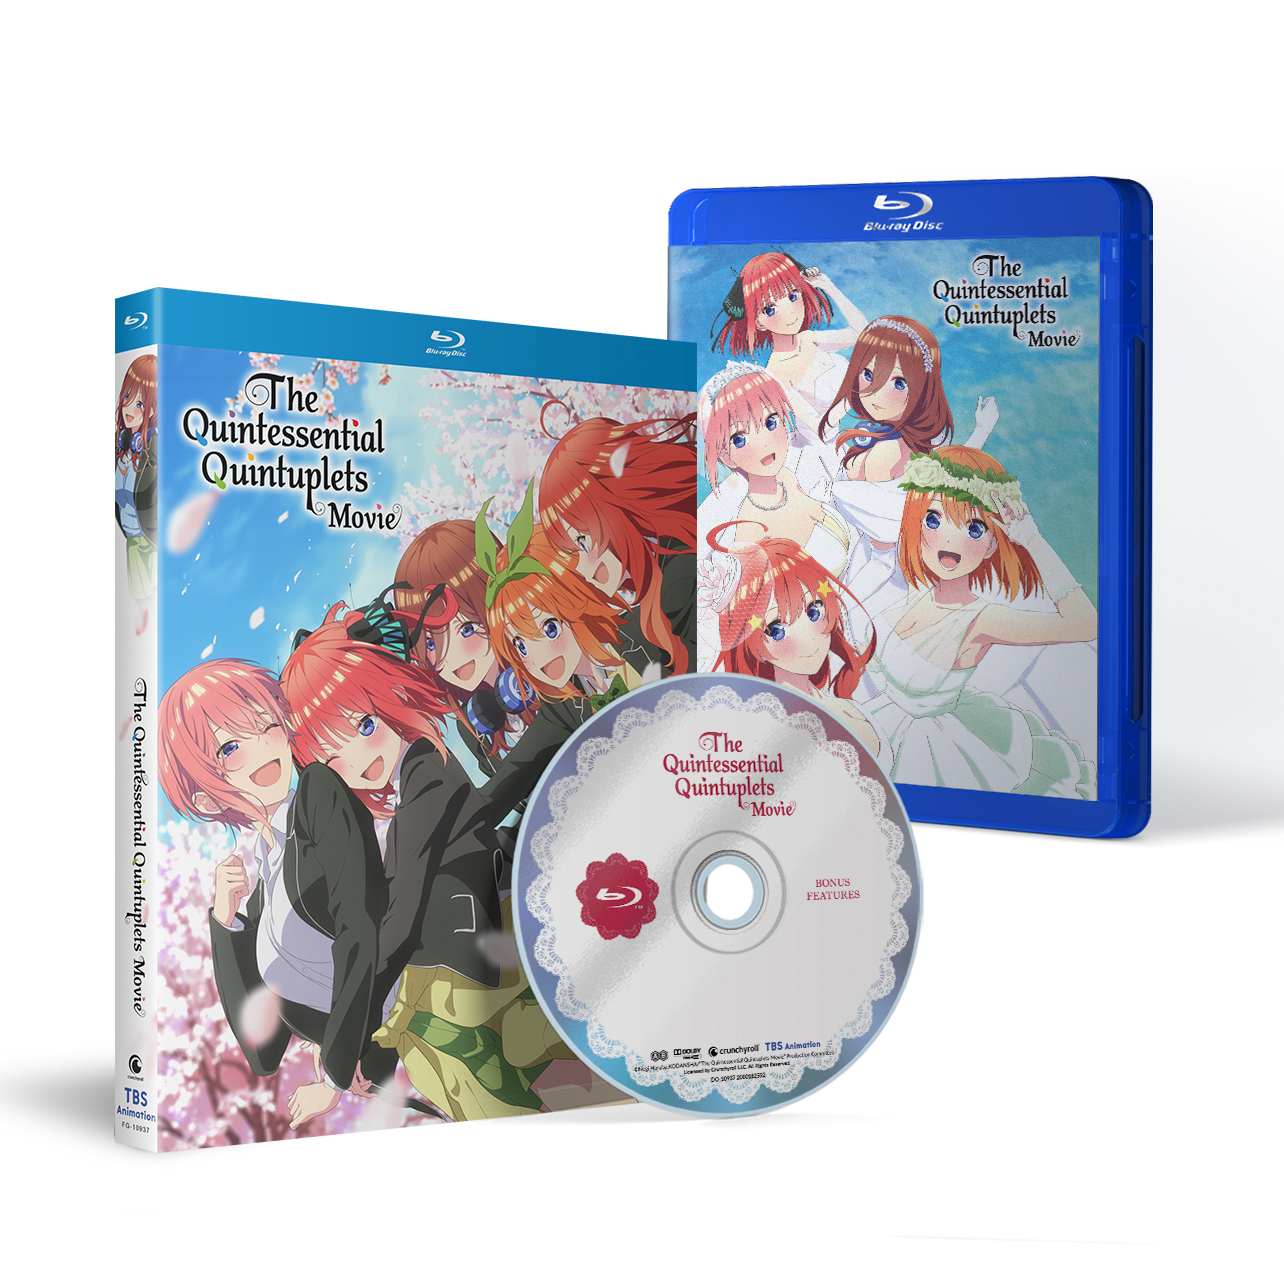 The Quintessential Quintuplets Movie - Blu-ray image count 1